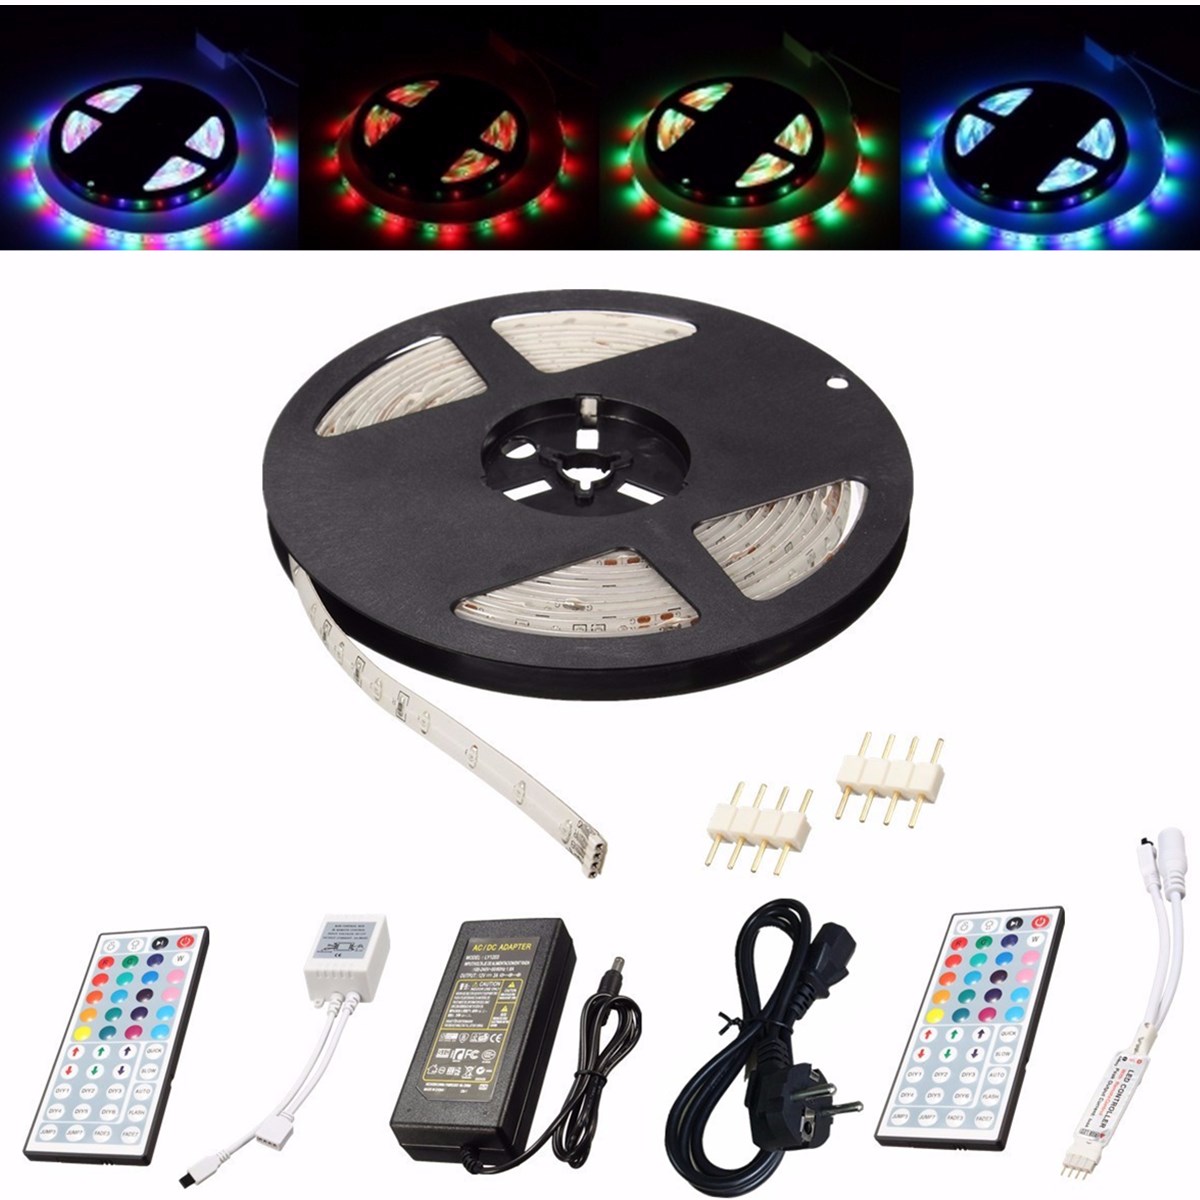 Find 5M 3528 SMD 300LED RGB Waterproof Flexible Strip Light 44 keys Remote Control EU Plug DC12V for Sale on Gipsybee.com with cryptocurrencies